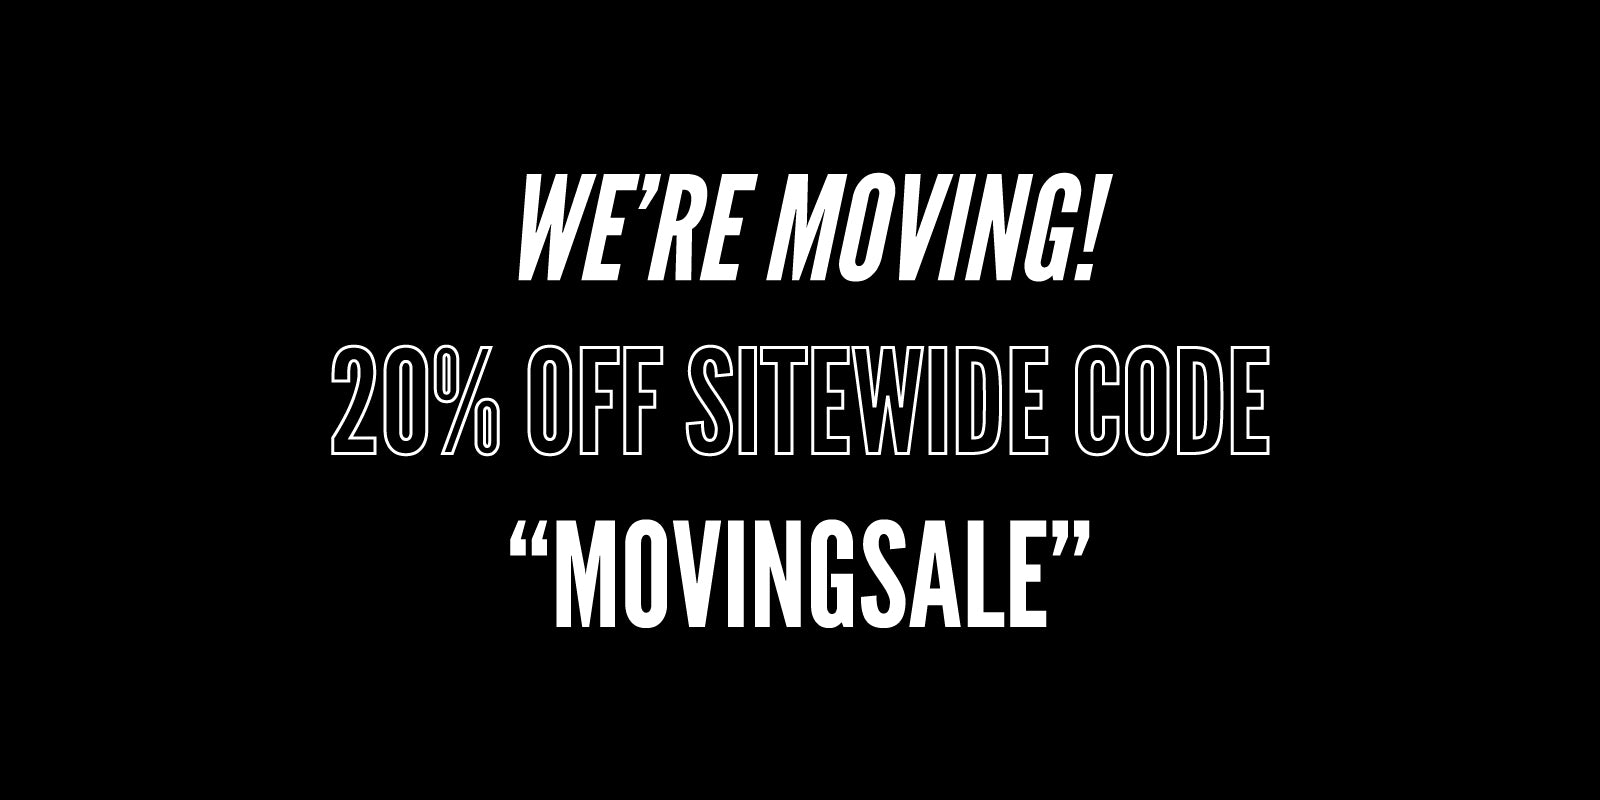 We're Moving! Enjoy 20% Off Sitewide